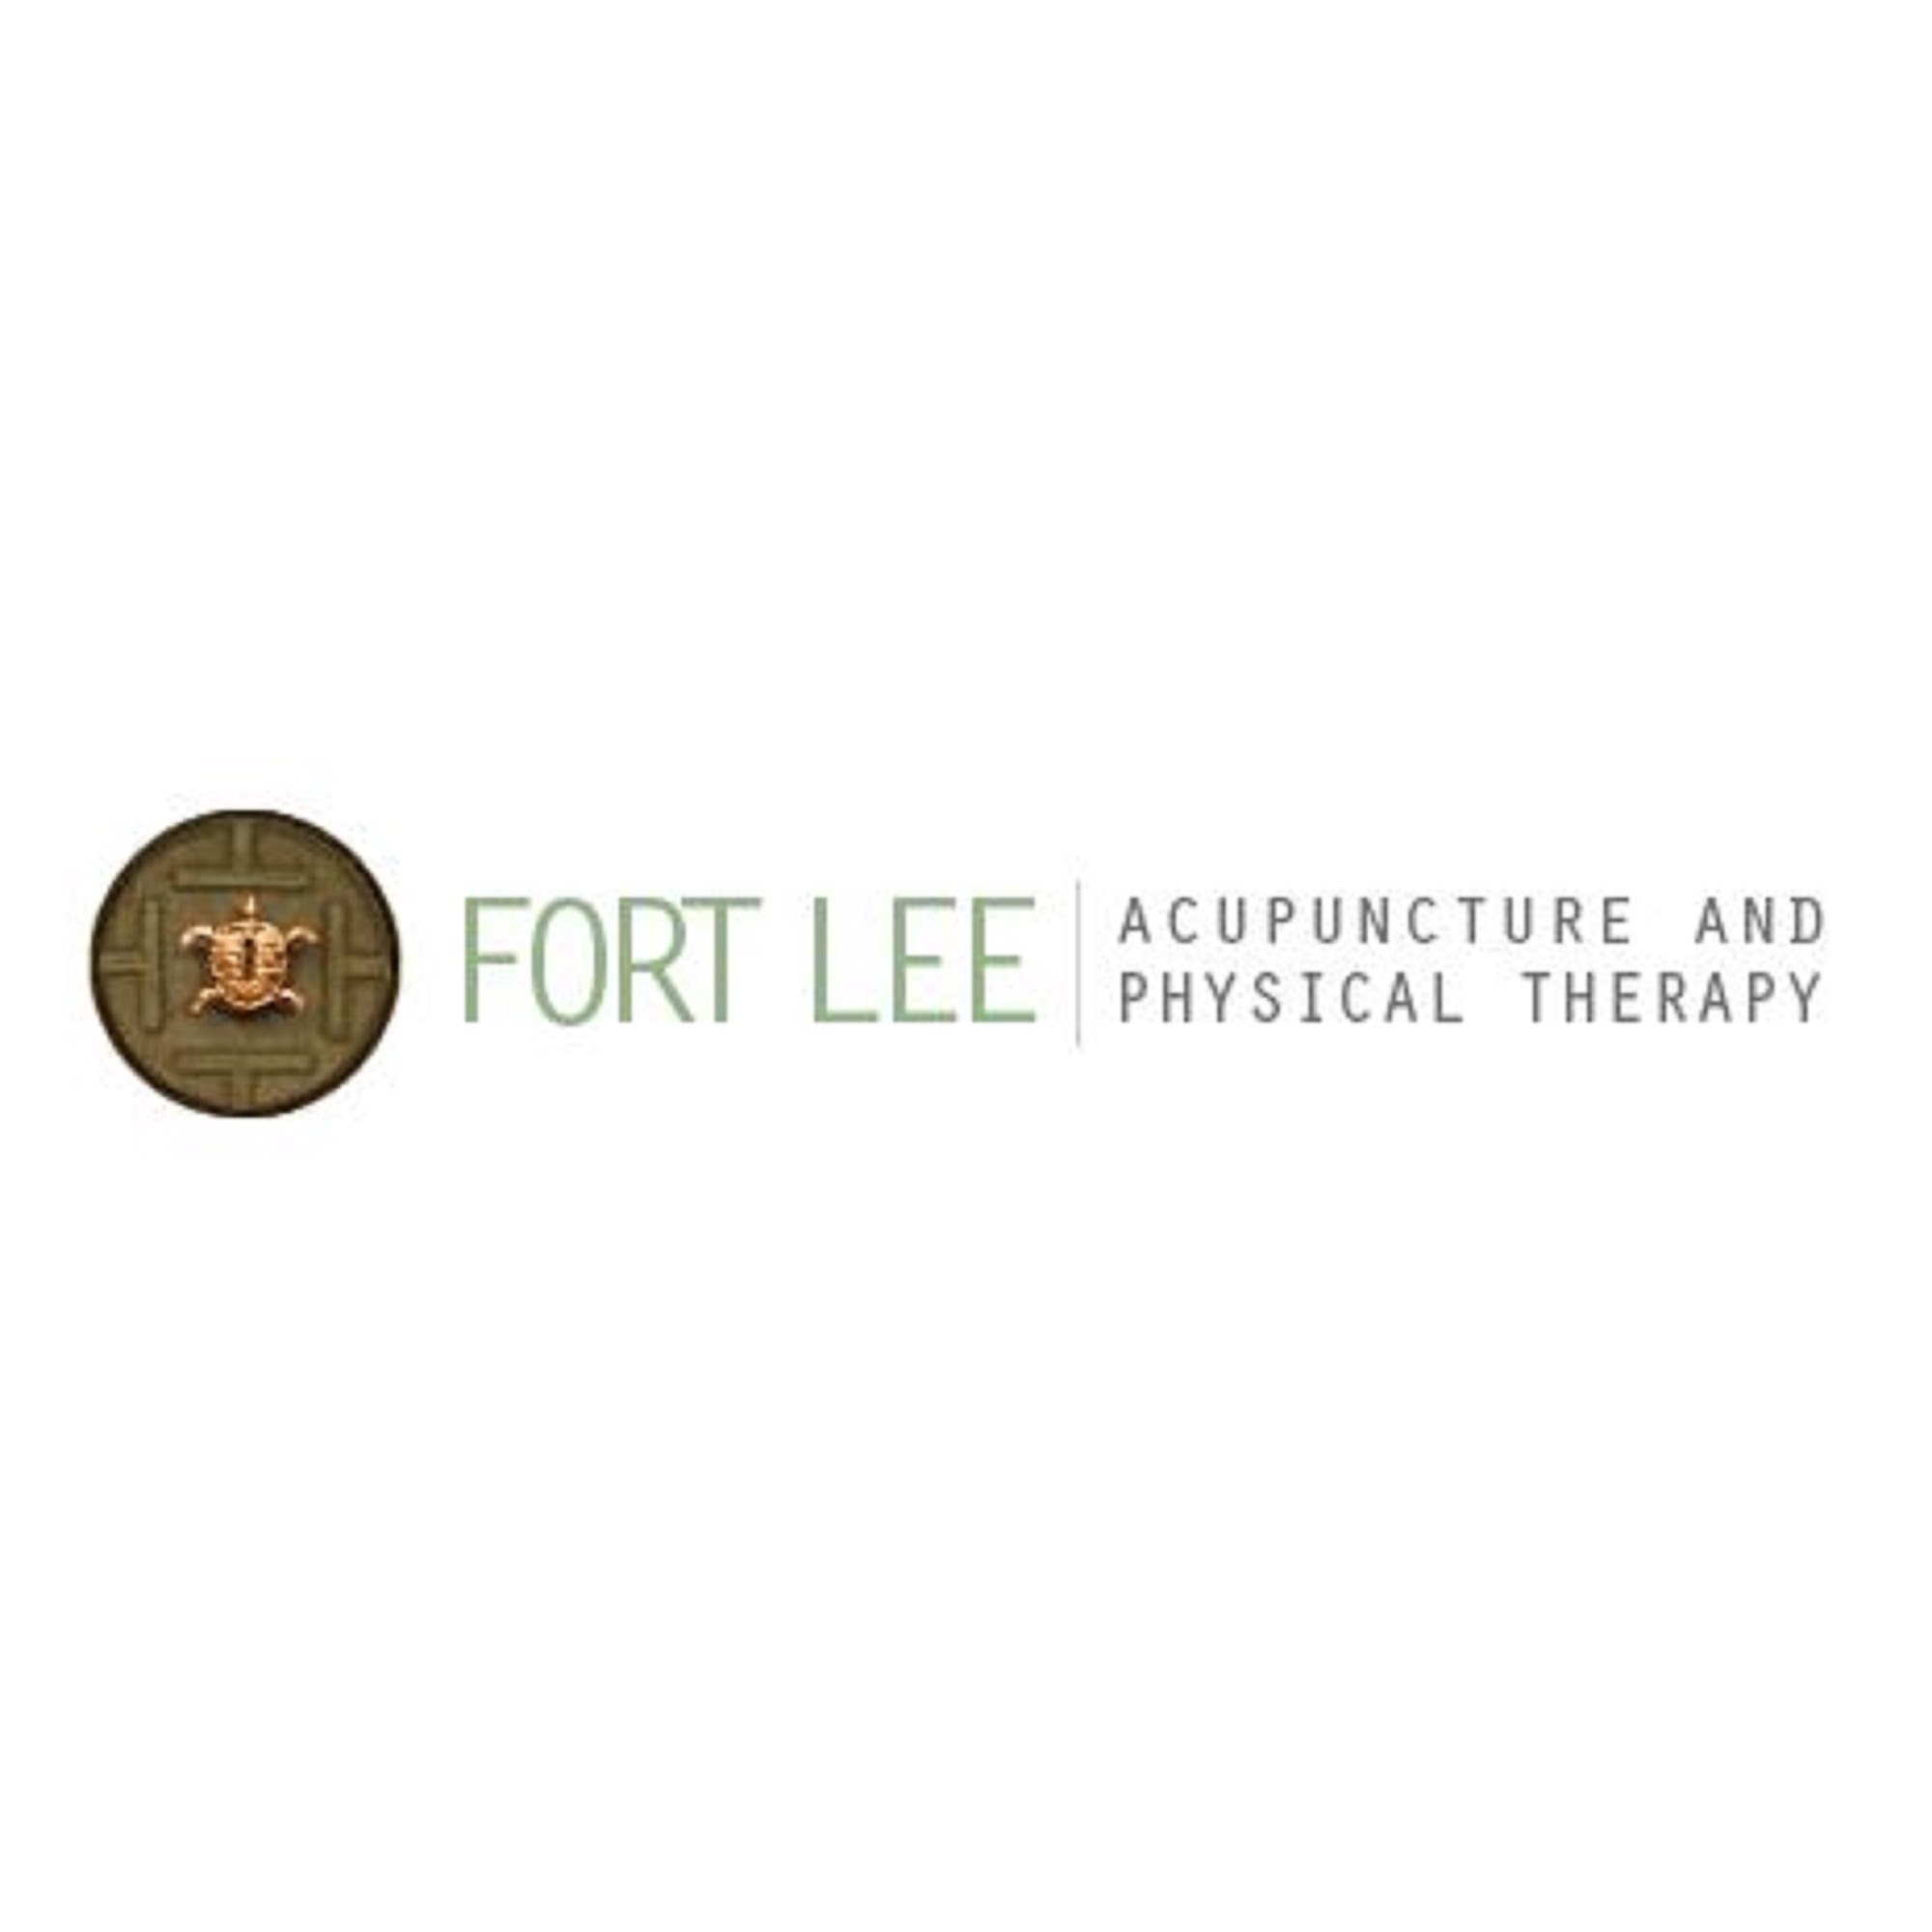 Fort Lee Acupuncture and Physical Therapy